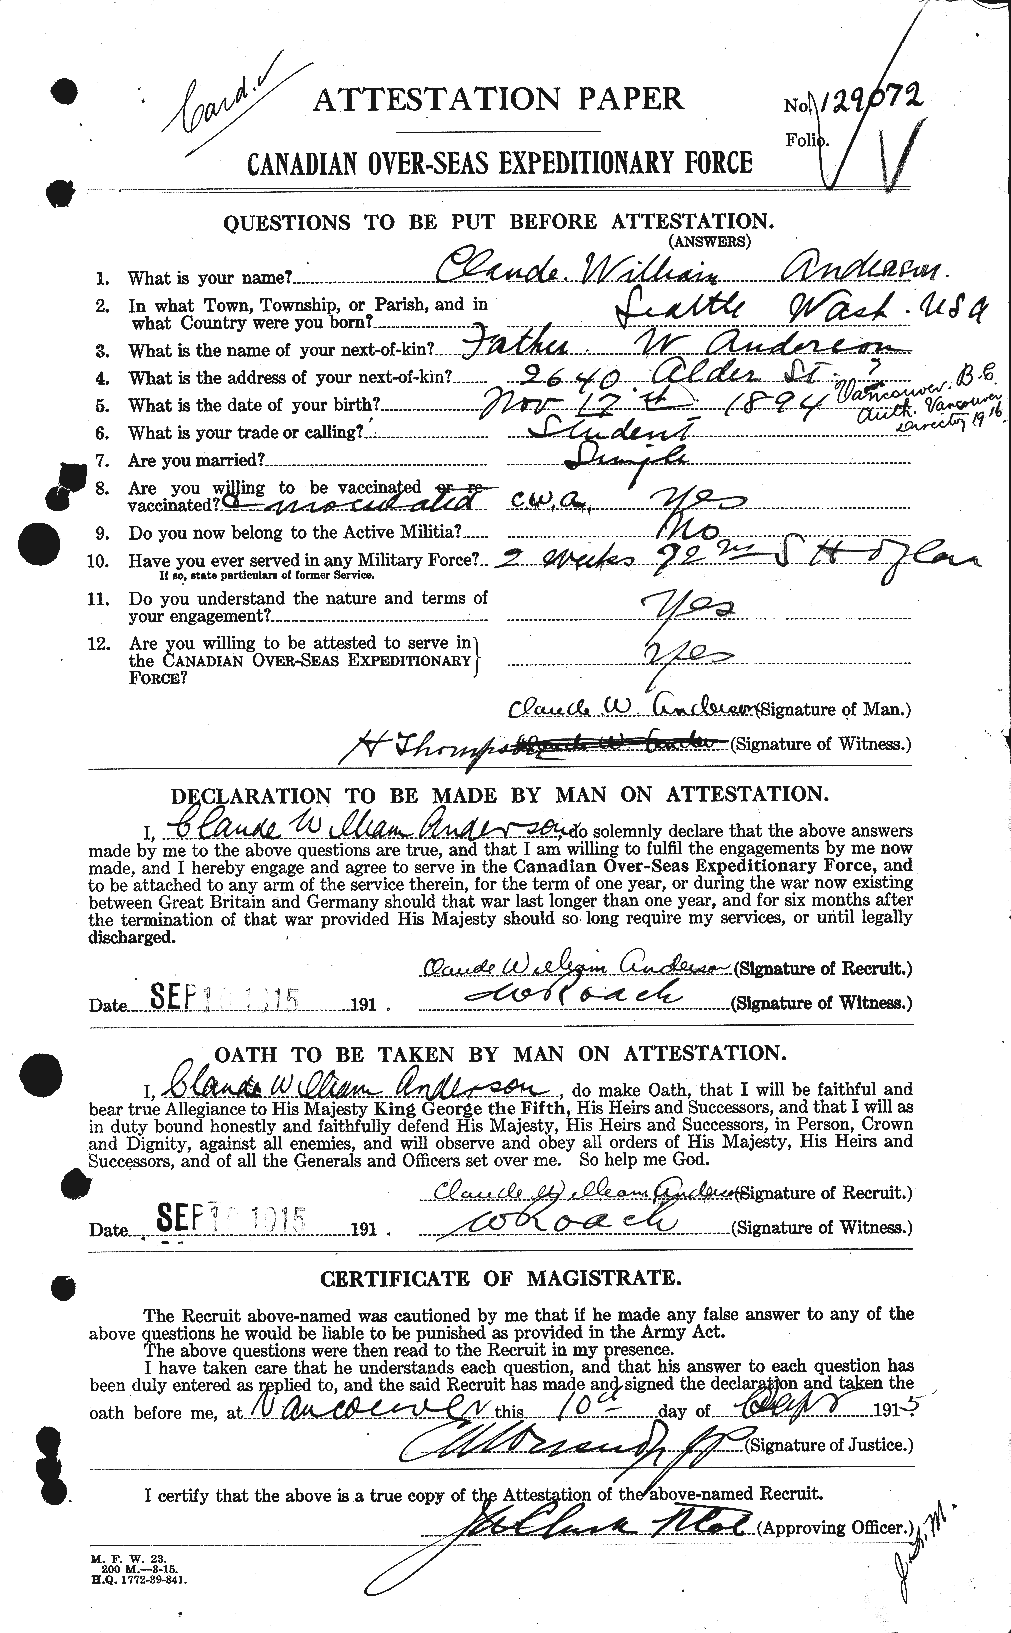 Personnel Records of the First World War - CEF 210067a